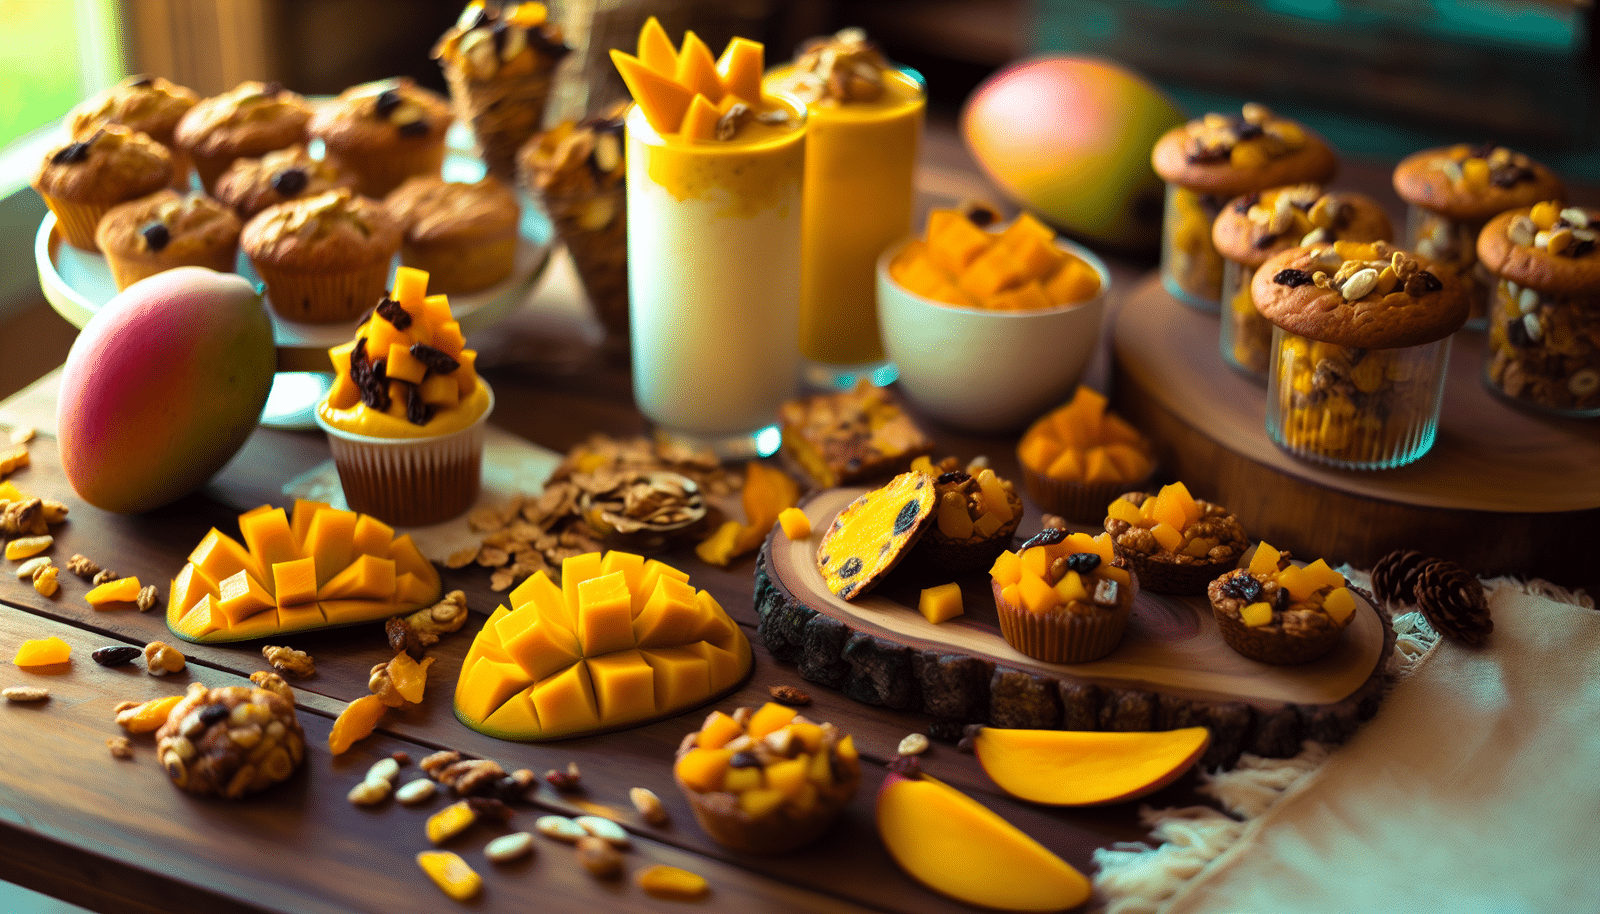 Variety of dried mango-infused desserts and snacks